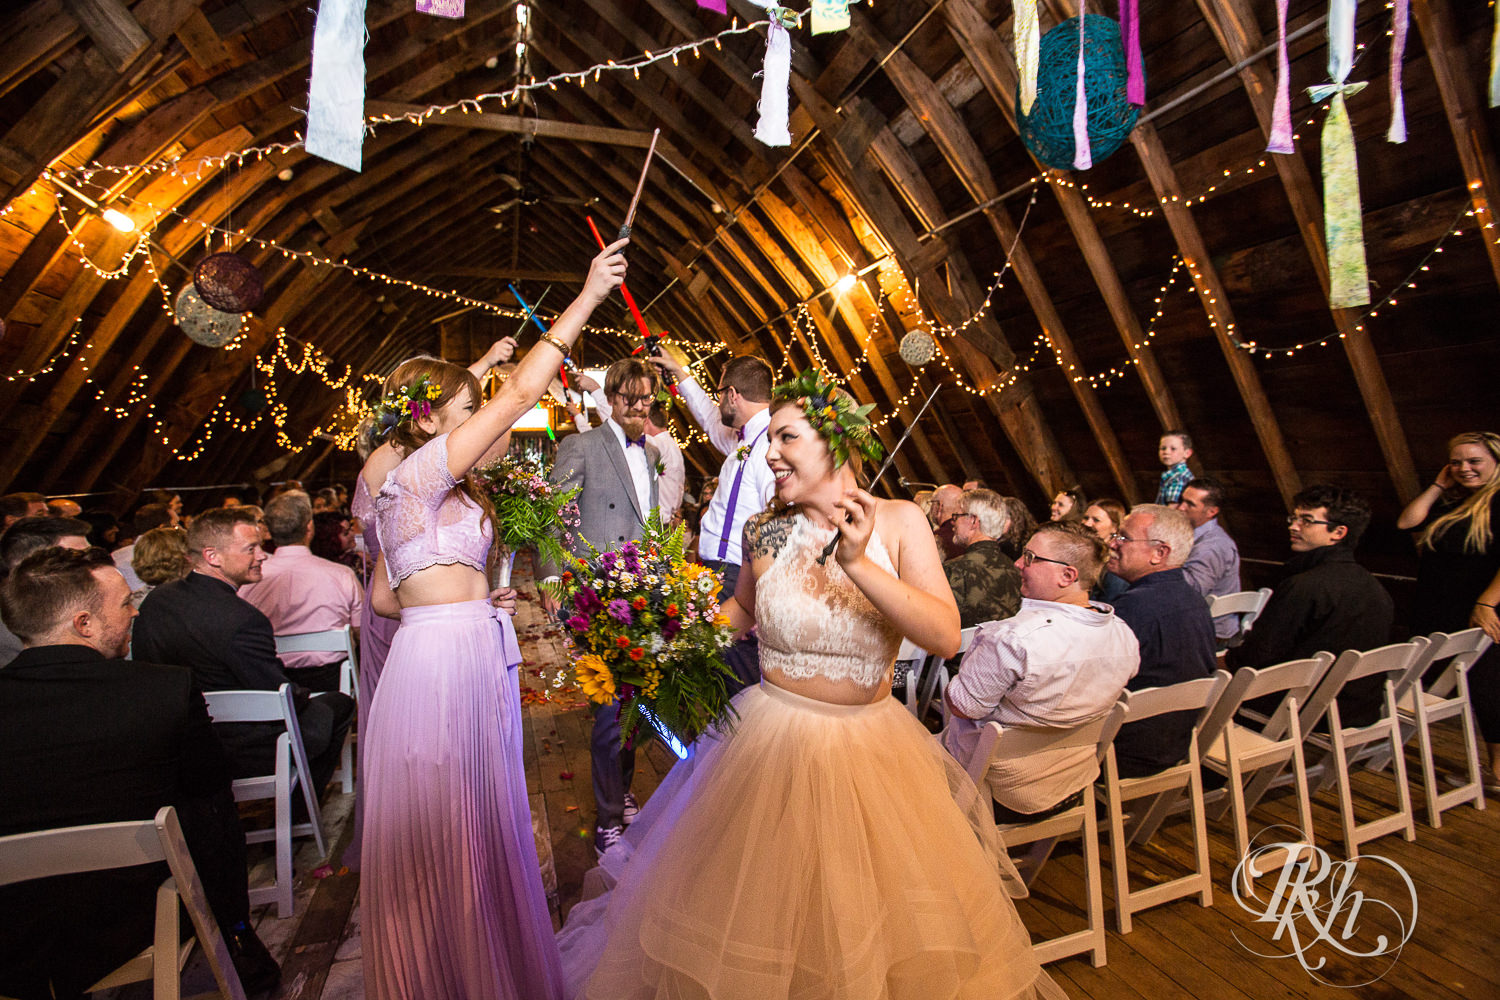 Bride and groom walk under lightsabers after wedding ceremony at Coops Event Barn in Dodge Center, Minnesota.